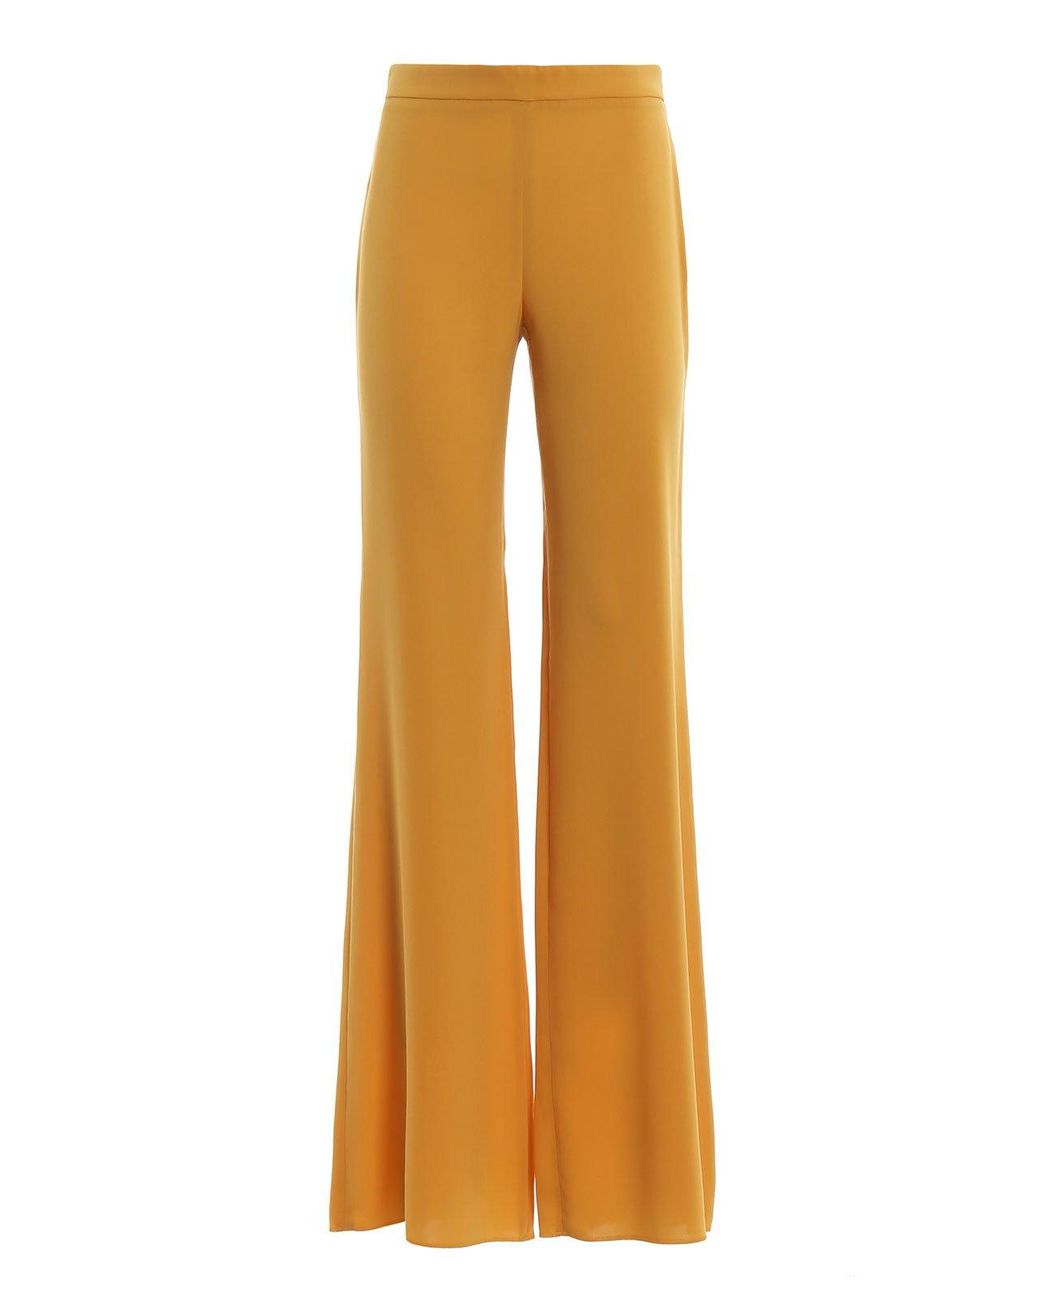 Weekend by Maxmara Cotton Flared Pants in Yellow - Lyst